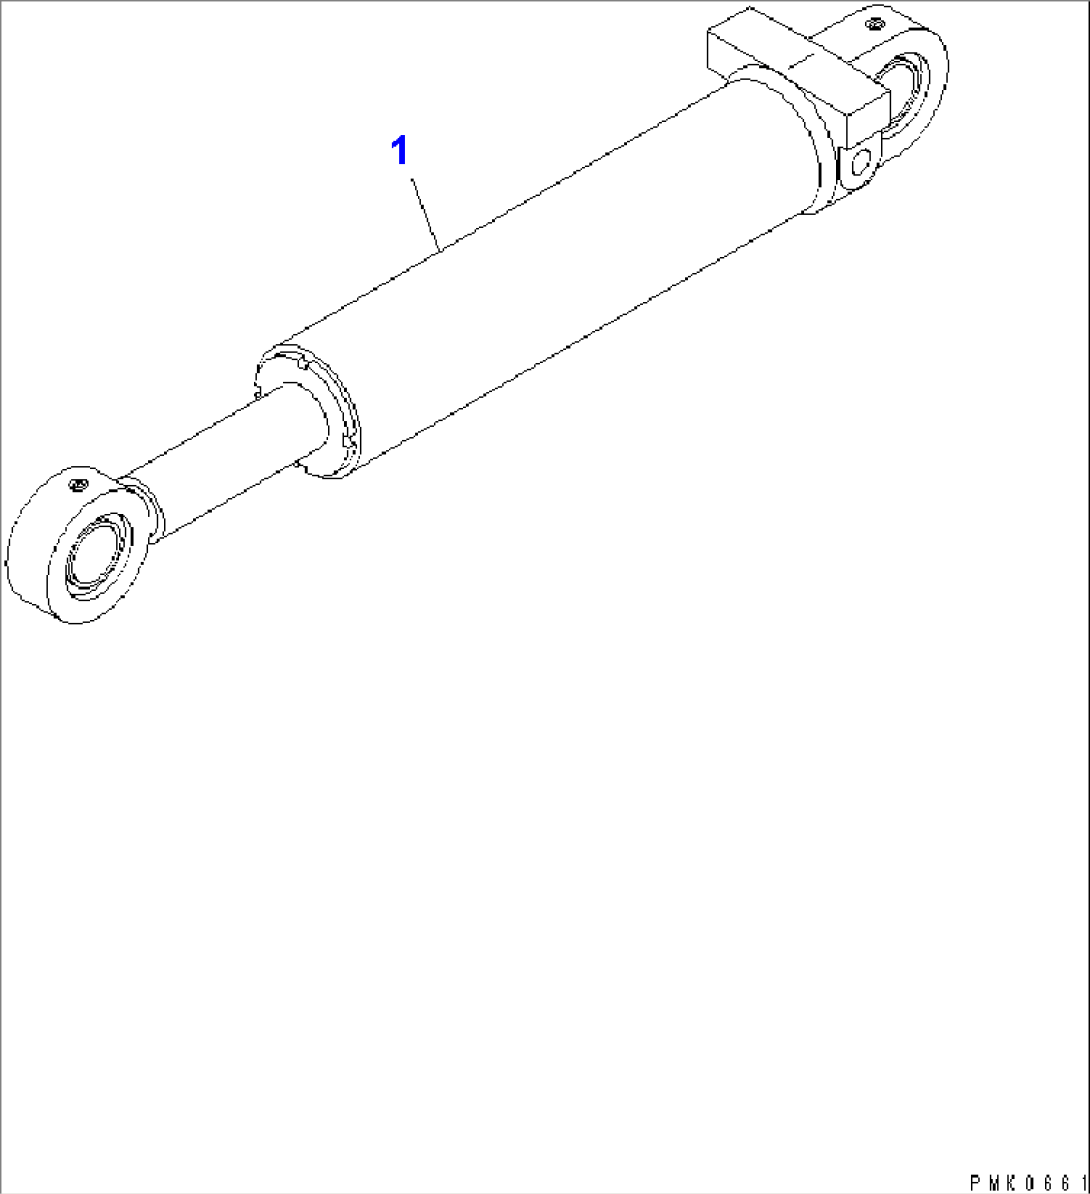 OUTRIGGER CYLINDER (FOR REAR OR FRONT OUTRIGGER)